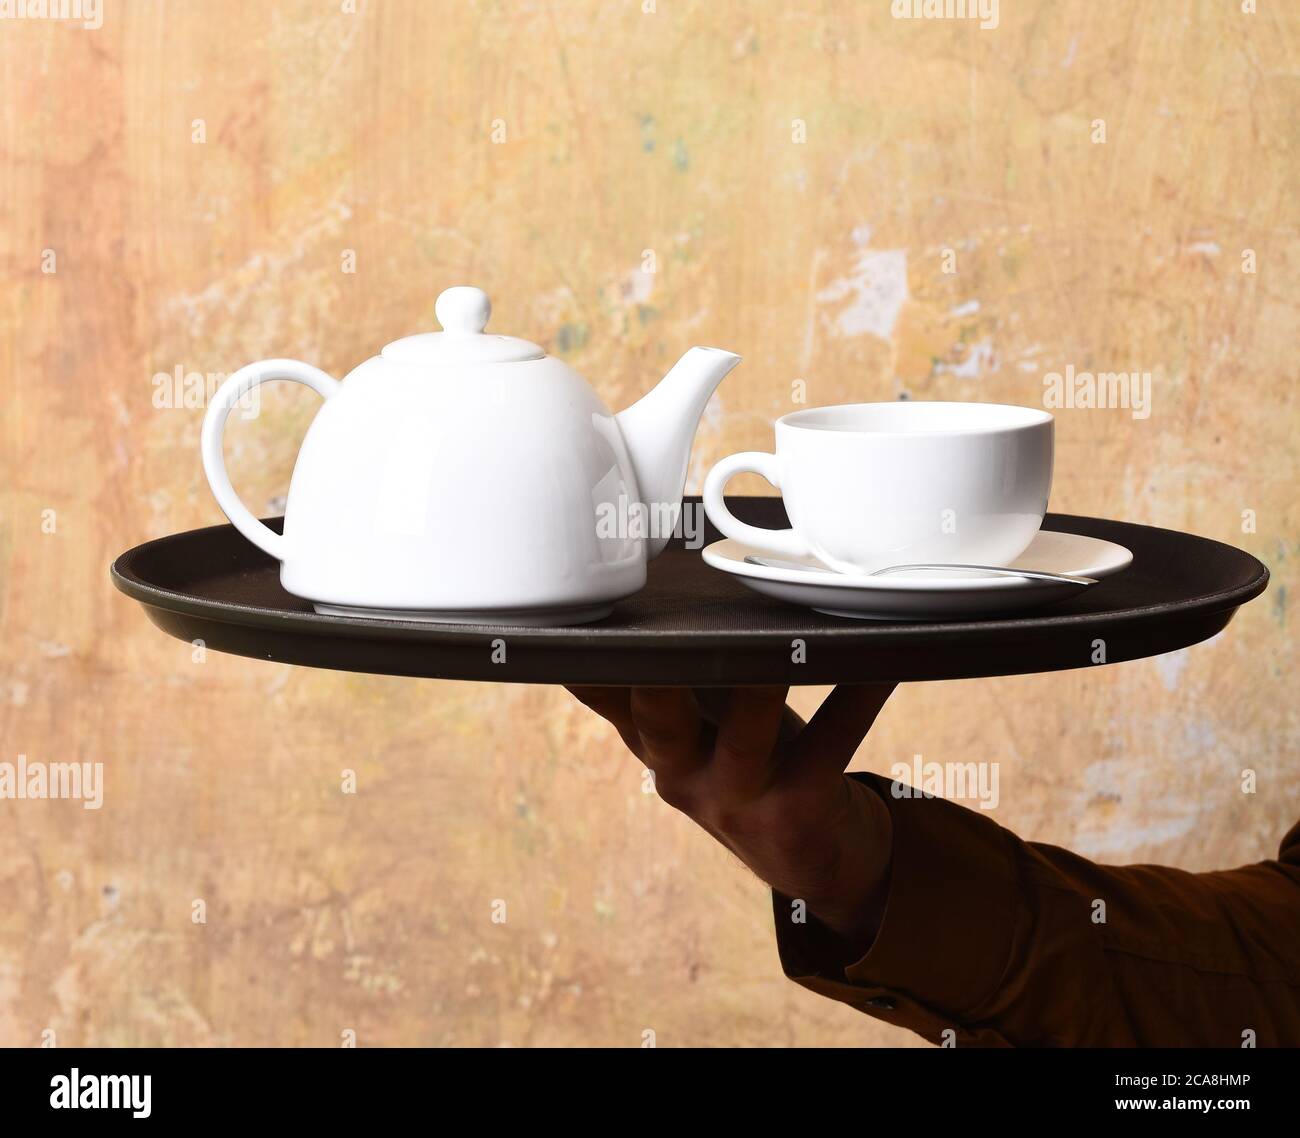 Barman brings tea or coffee. Service and restaurant catering concept. Waiters hand with white tea cup and pot on tray. Male hand serves tea on beige wall background, close up. Stock Photo